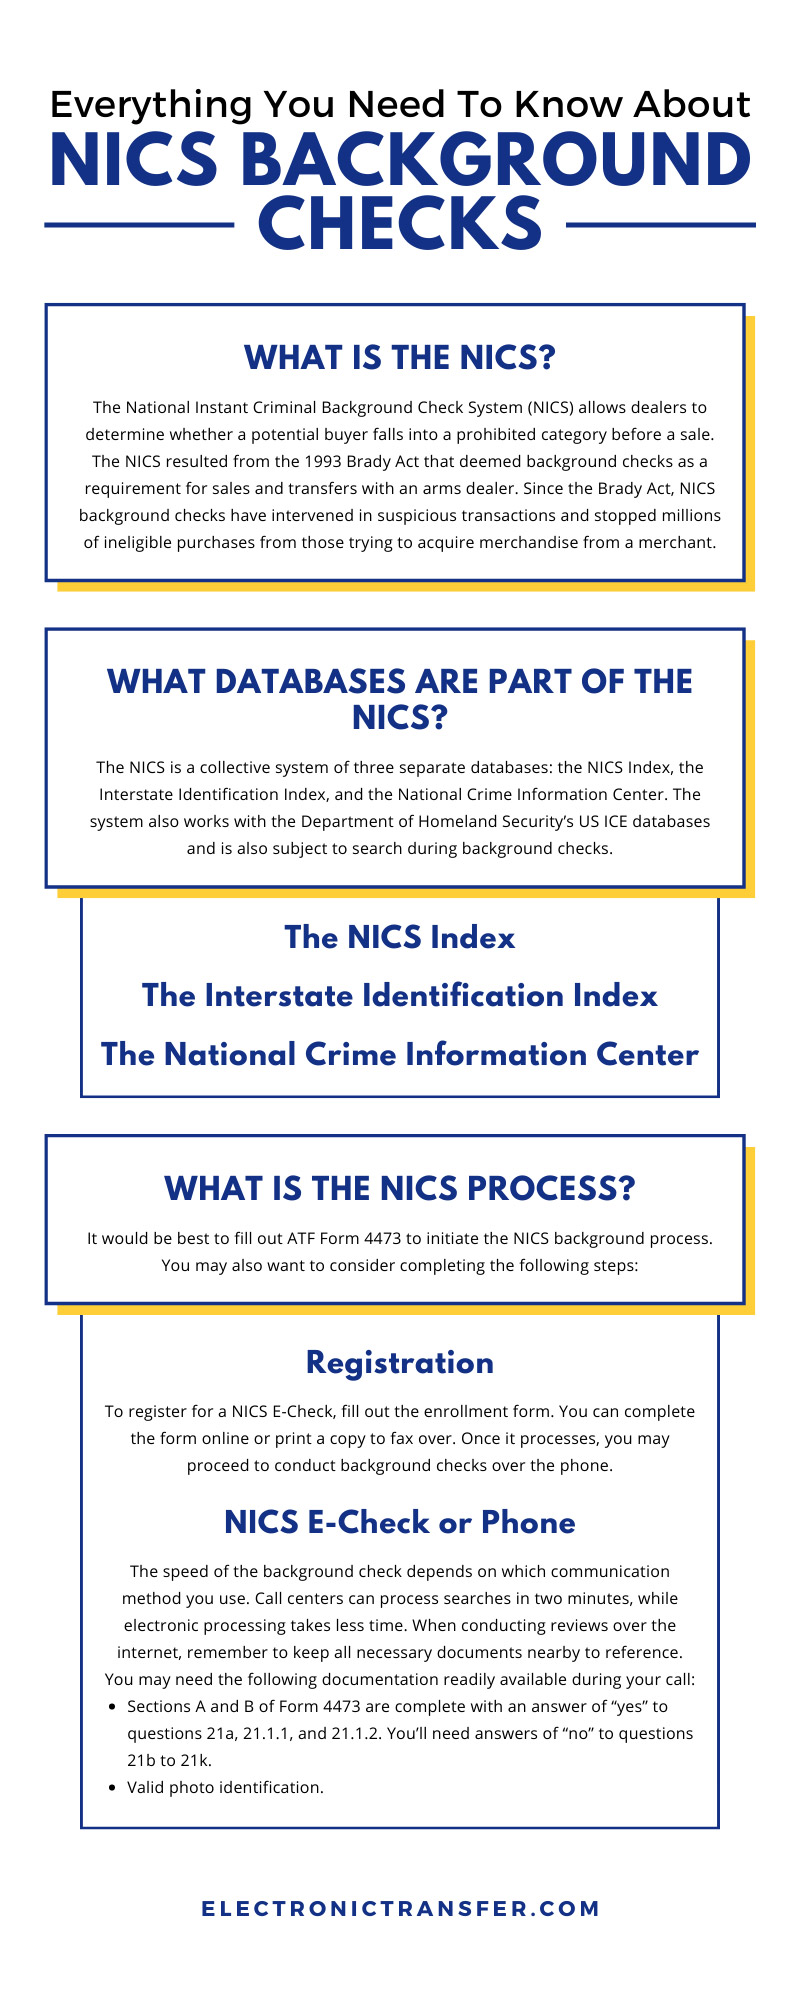 Everything You Need To Know About NICS Background Checks